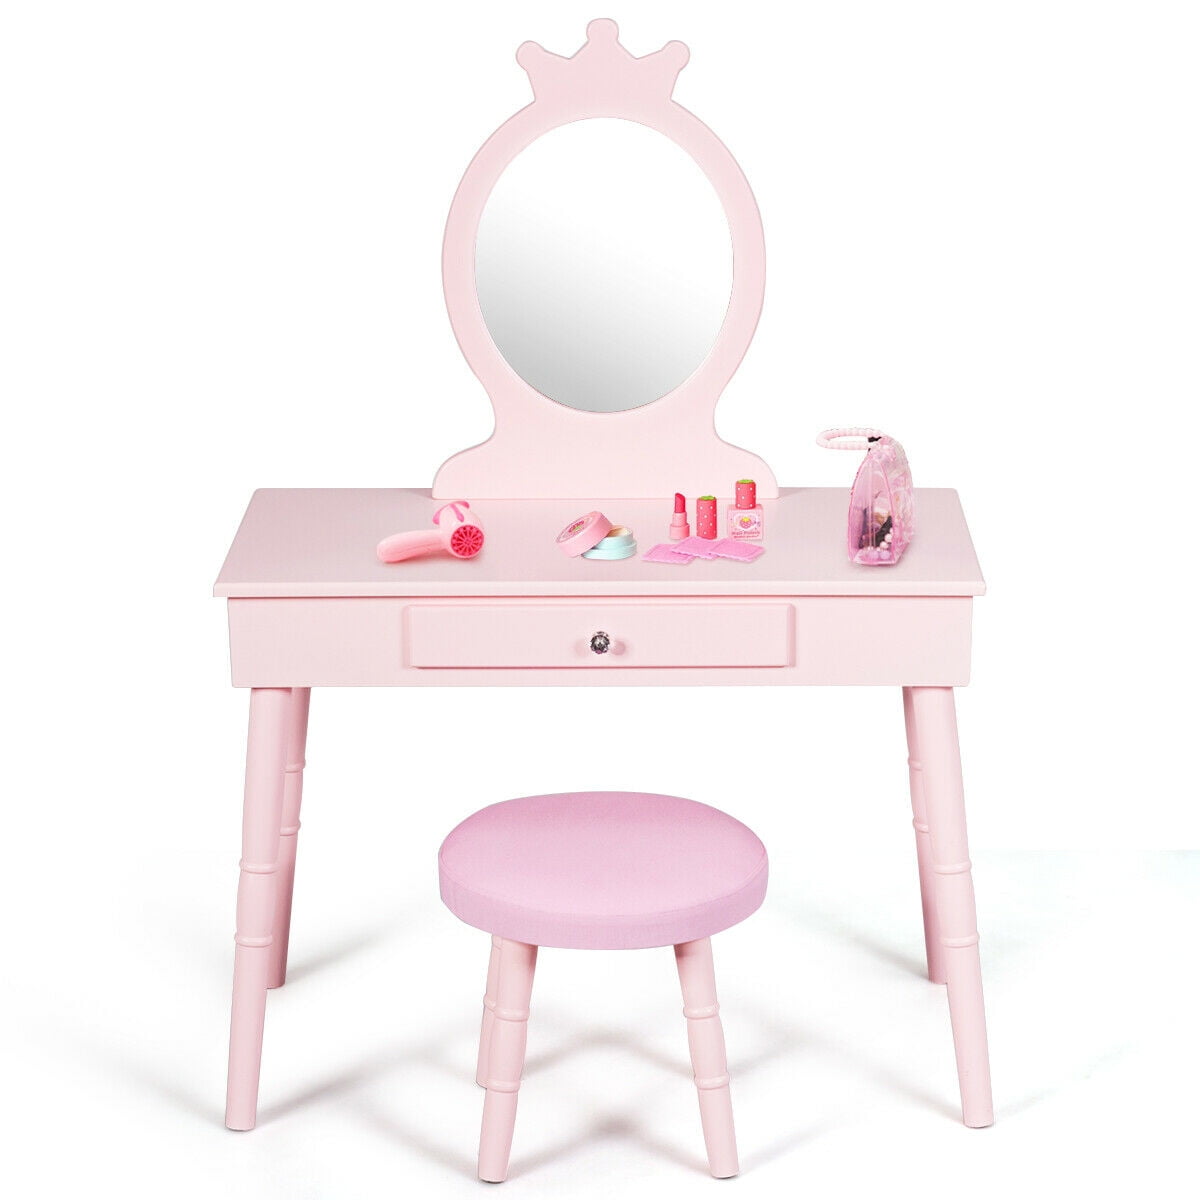 Girls Kids Makeup Table Chair Foxhunter, Toy Vanity Table And Stool